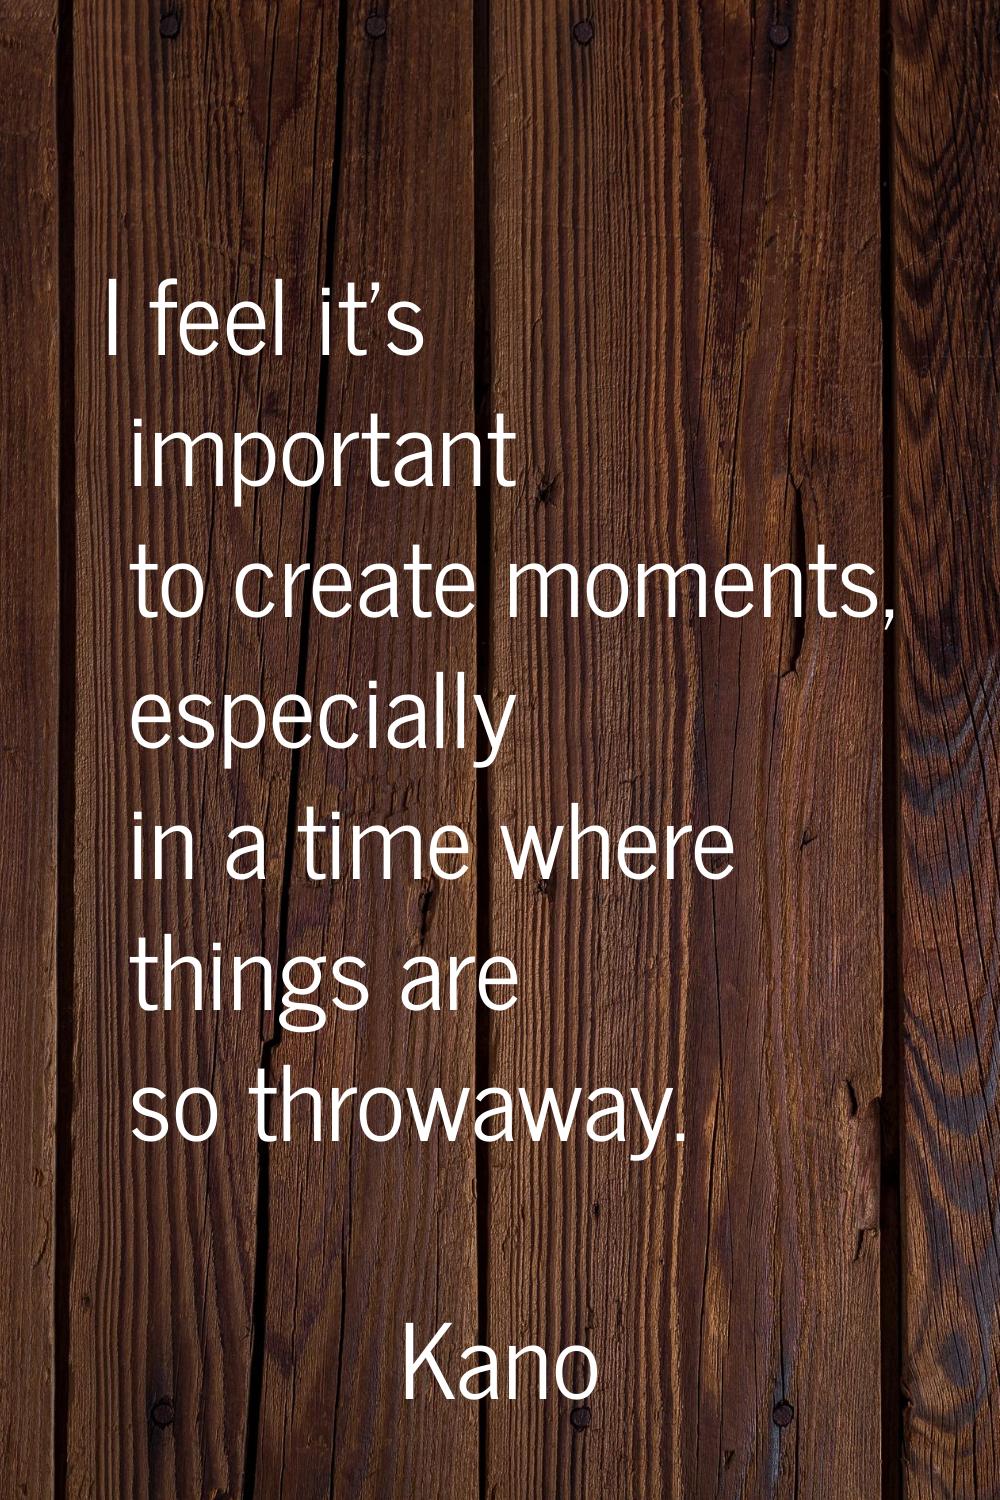 I feel it's important to create moments, especially in a time where things are so throwaway.